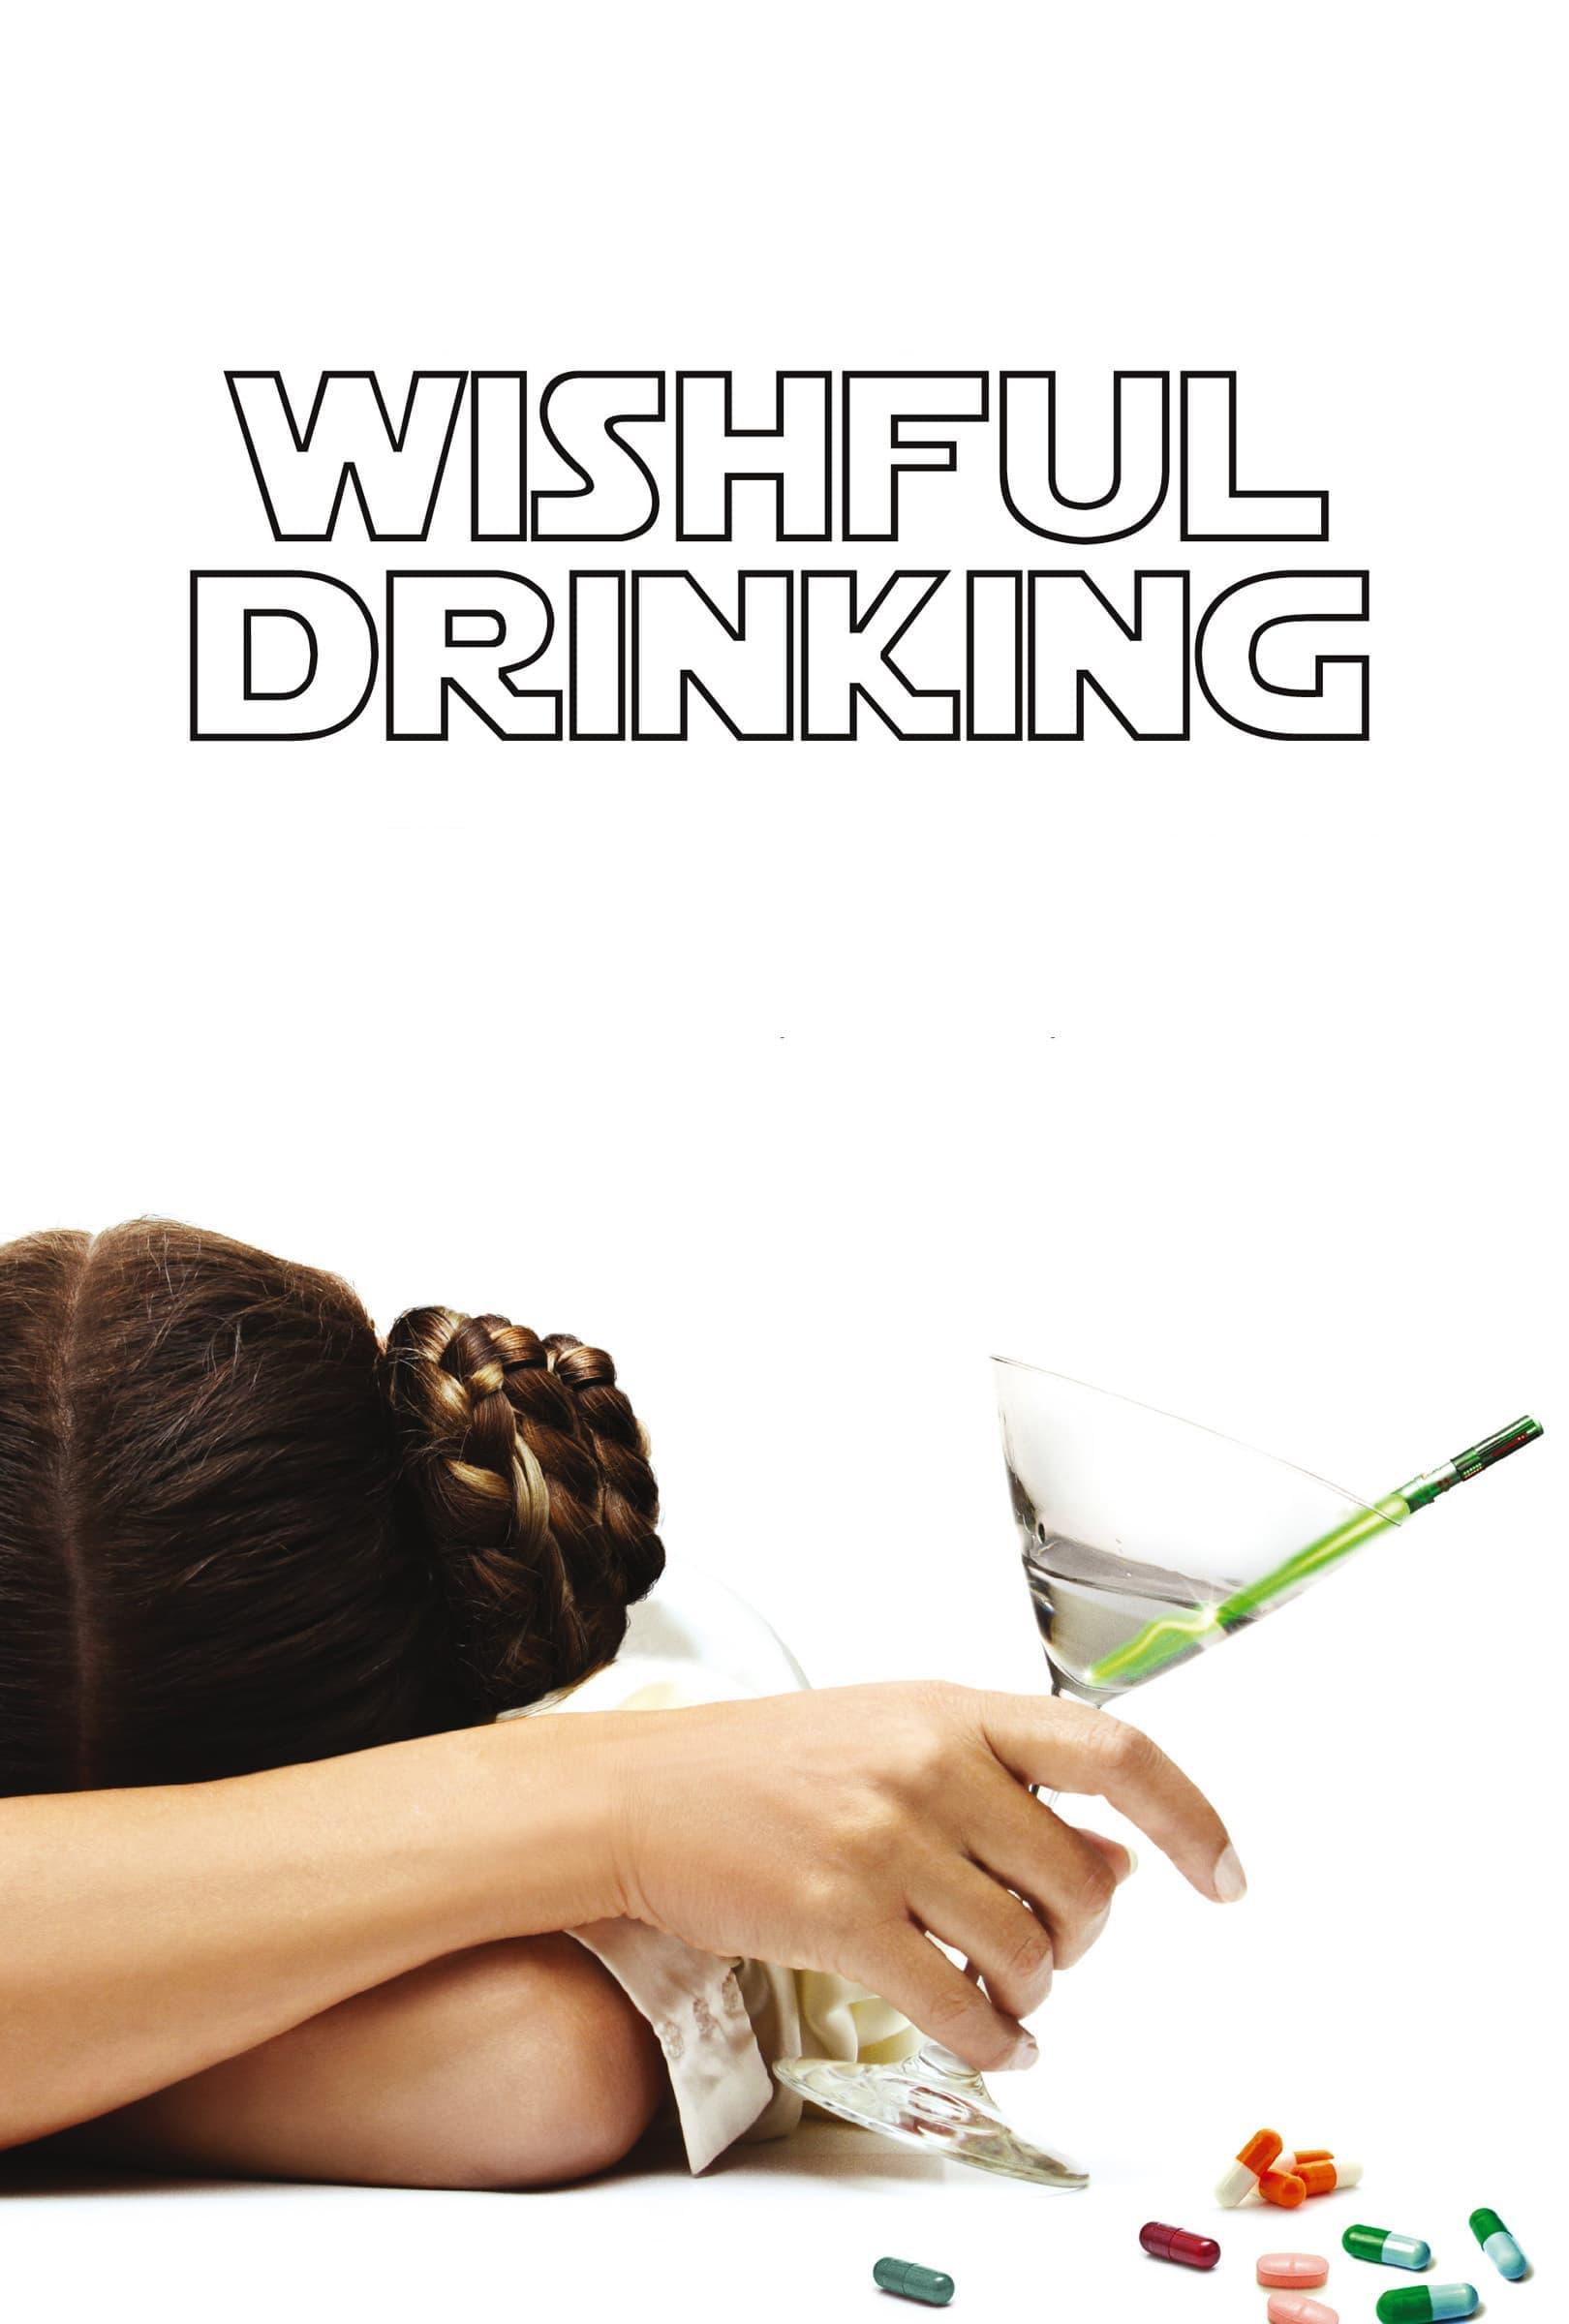 Carrie Fisher: Wishful Drinking poster